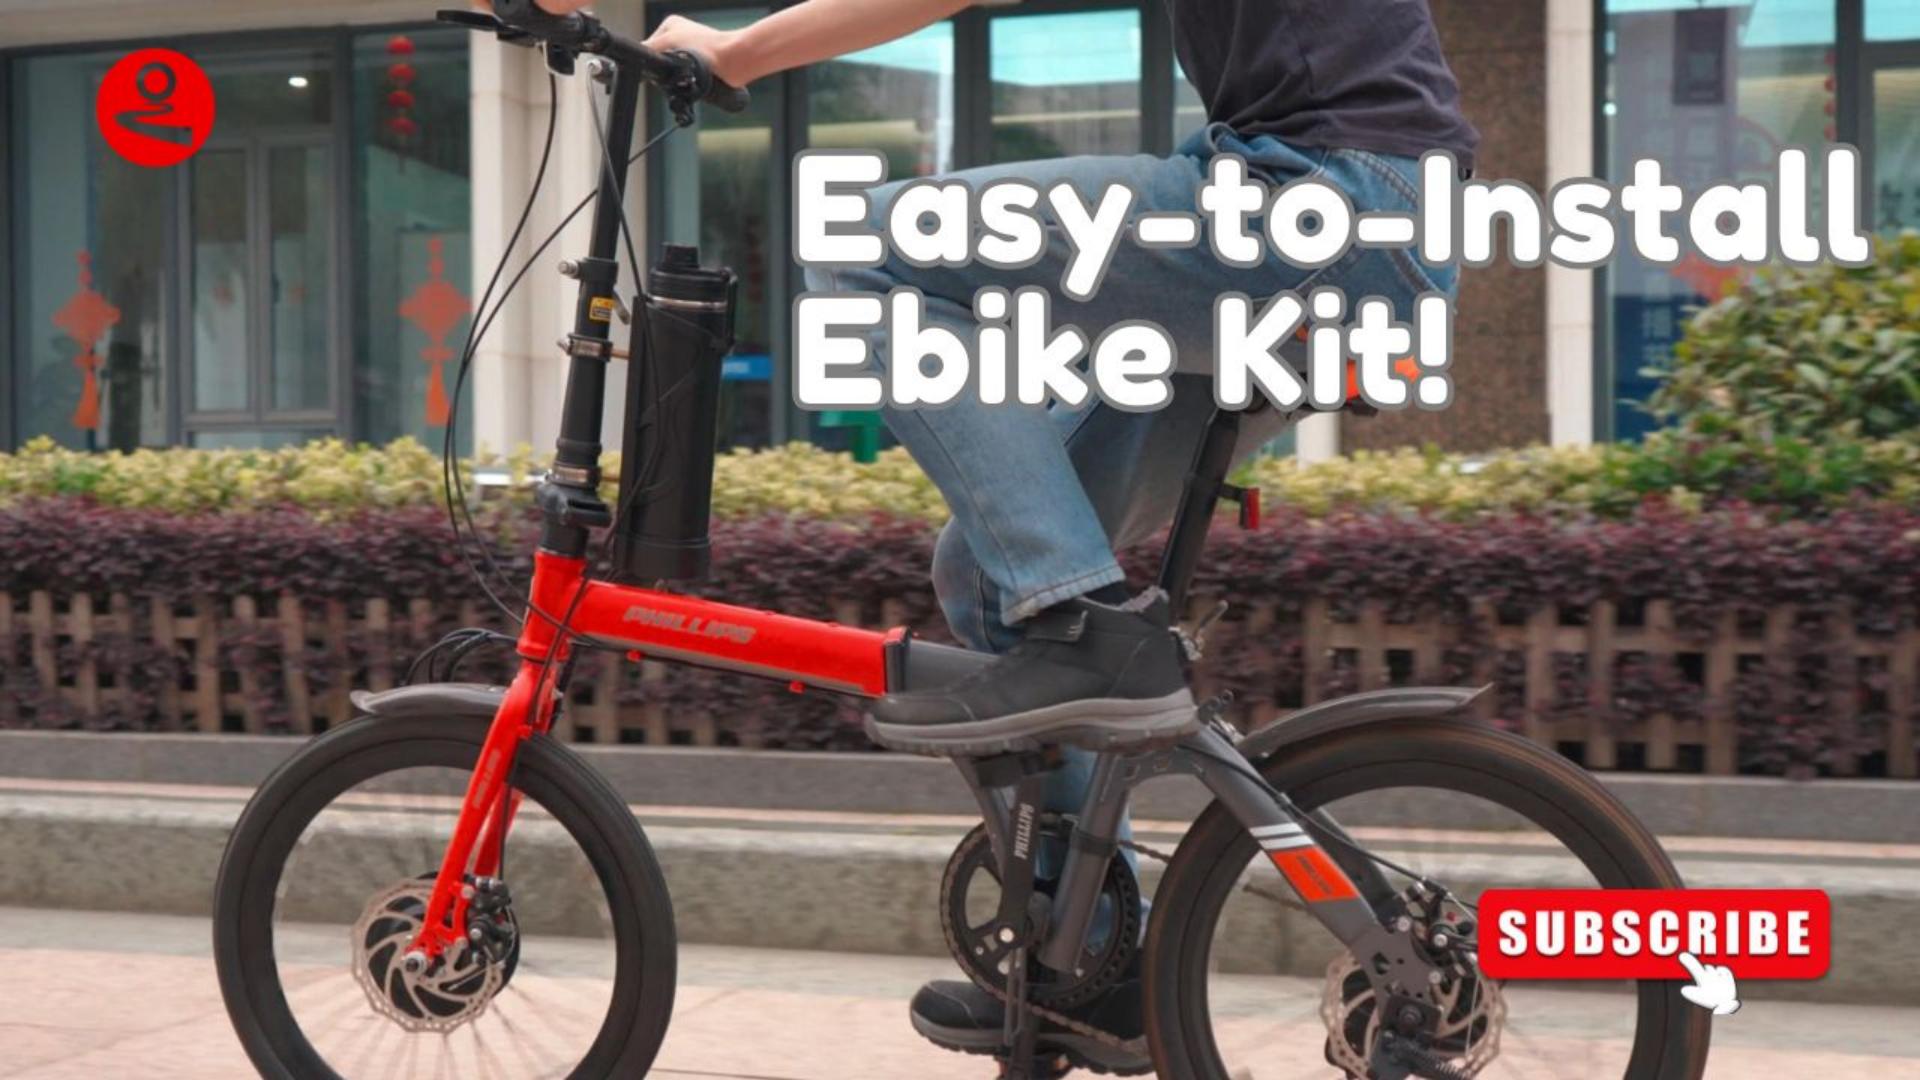 Transform Your Bike into an Electric Powerhouse with Our Easy-to-Install Ebike Kit!